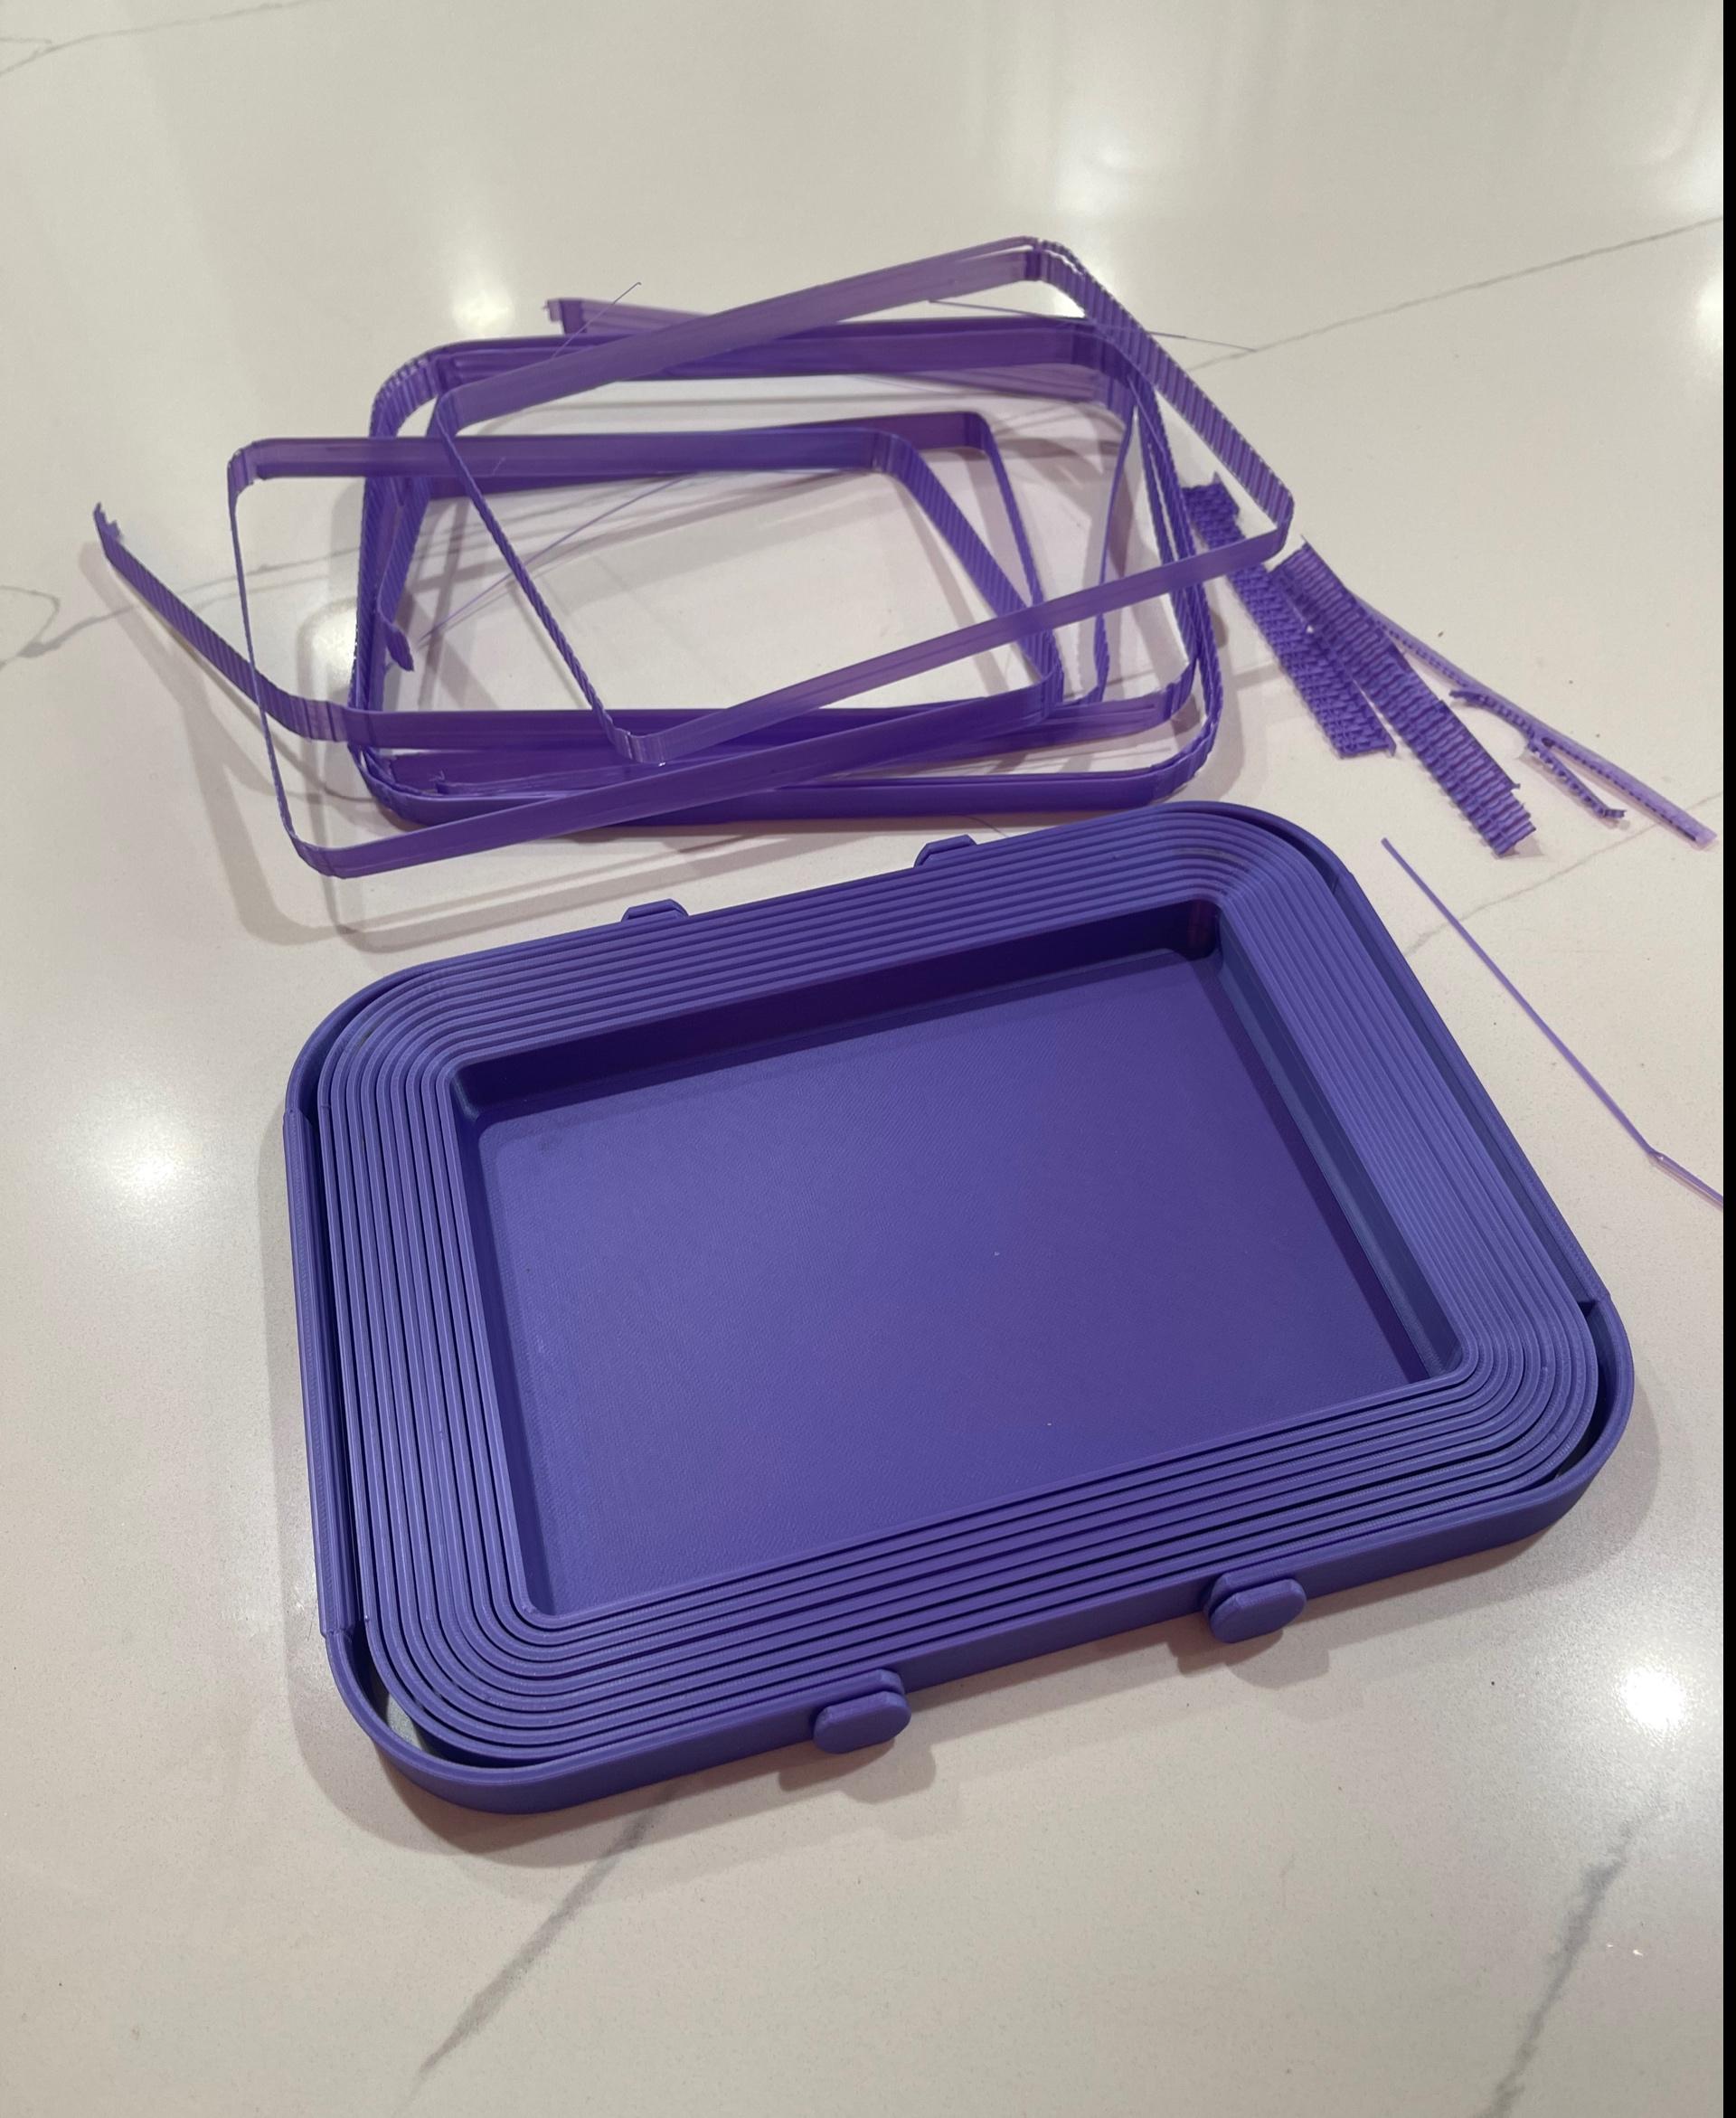 Collapsible Picnic Basket.stl - I printed this on my Prusa 3+ and it was my most trying print thus far. I tried with PETG but it clumped and crashed. I switched to PLA and readjusted the first layer to stick better and it worked. Mine said it recommended supports so that is what the bands are in the photo. They were easy to remove. It took a long time to print but I was glad I overcame the two crashed runs and got it to print. Loving the purple PLA. 
 - 3d model